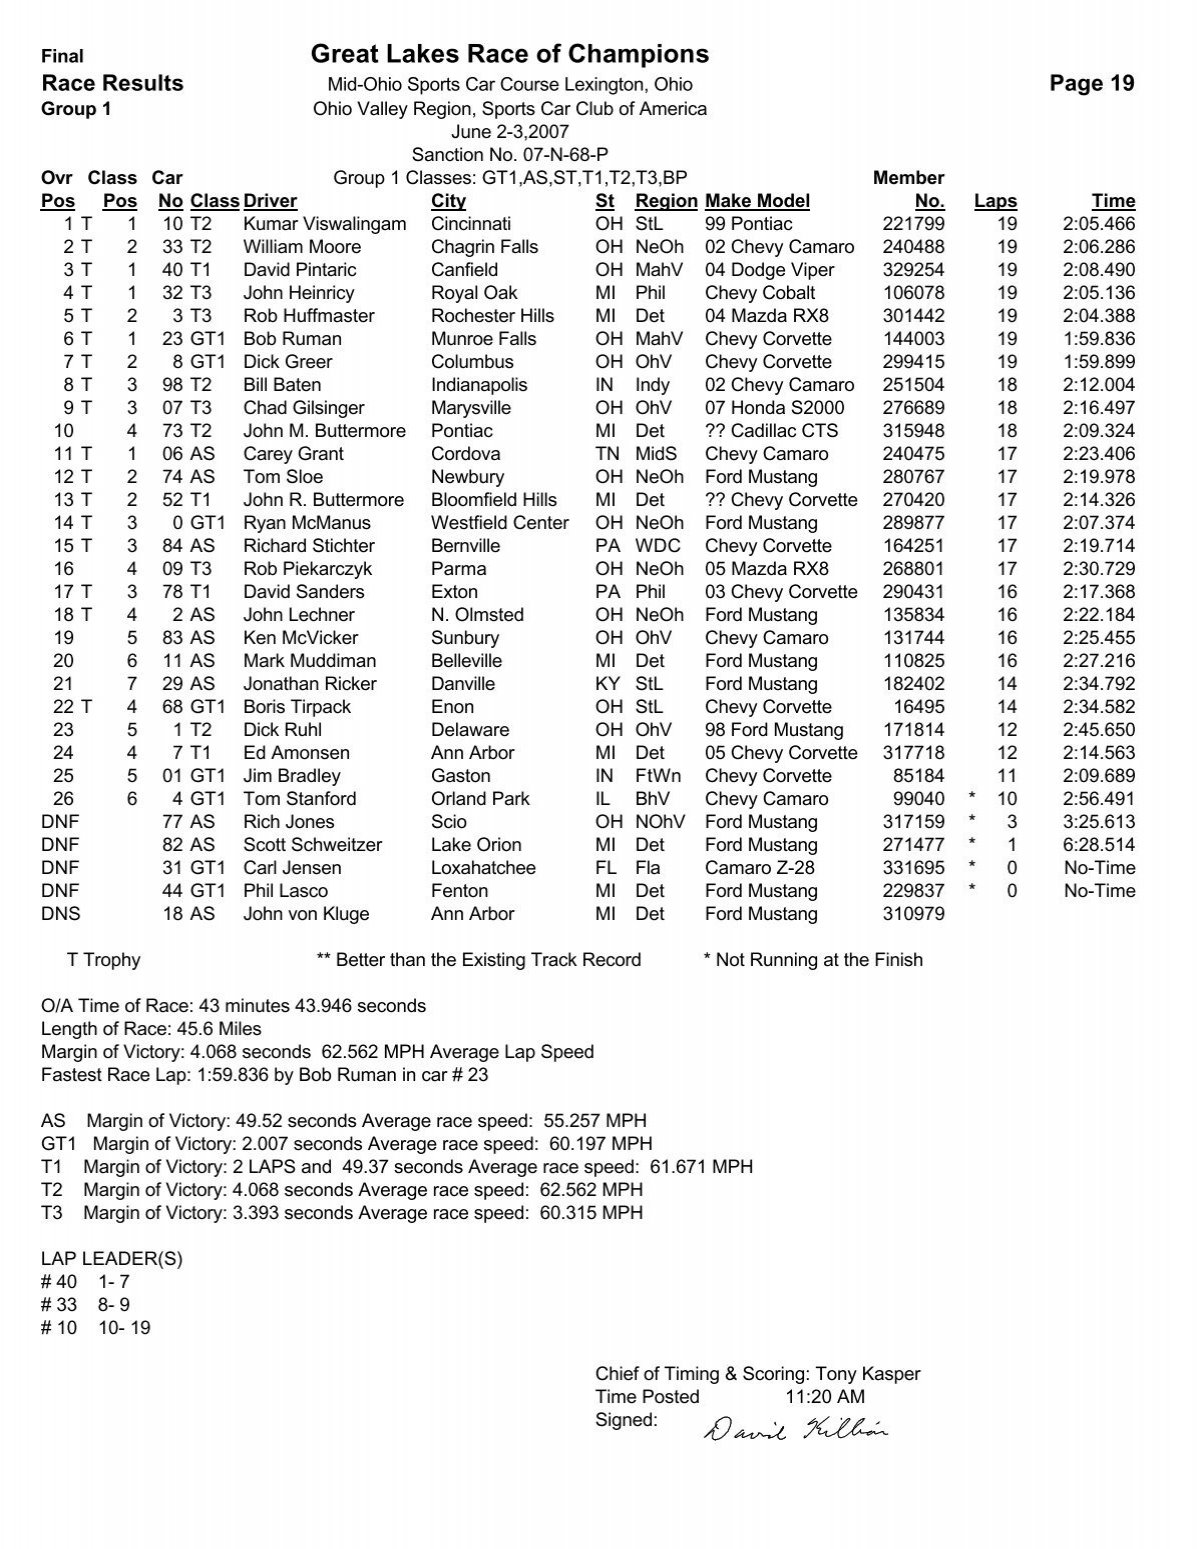 Race Results - The Ohio Valley Region of the SCCA